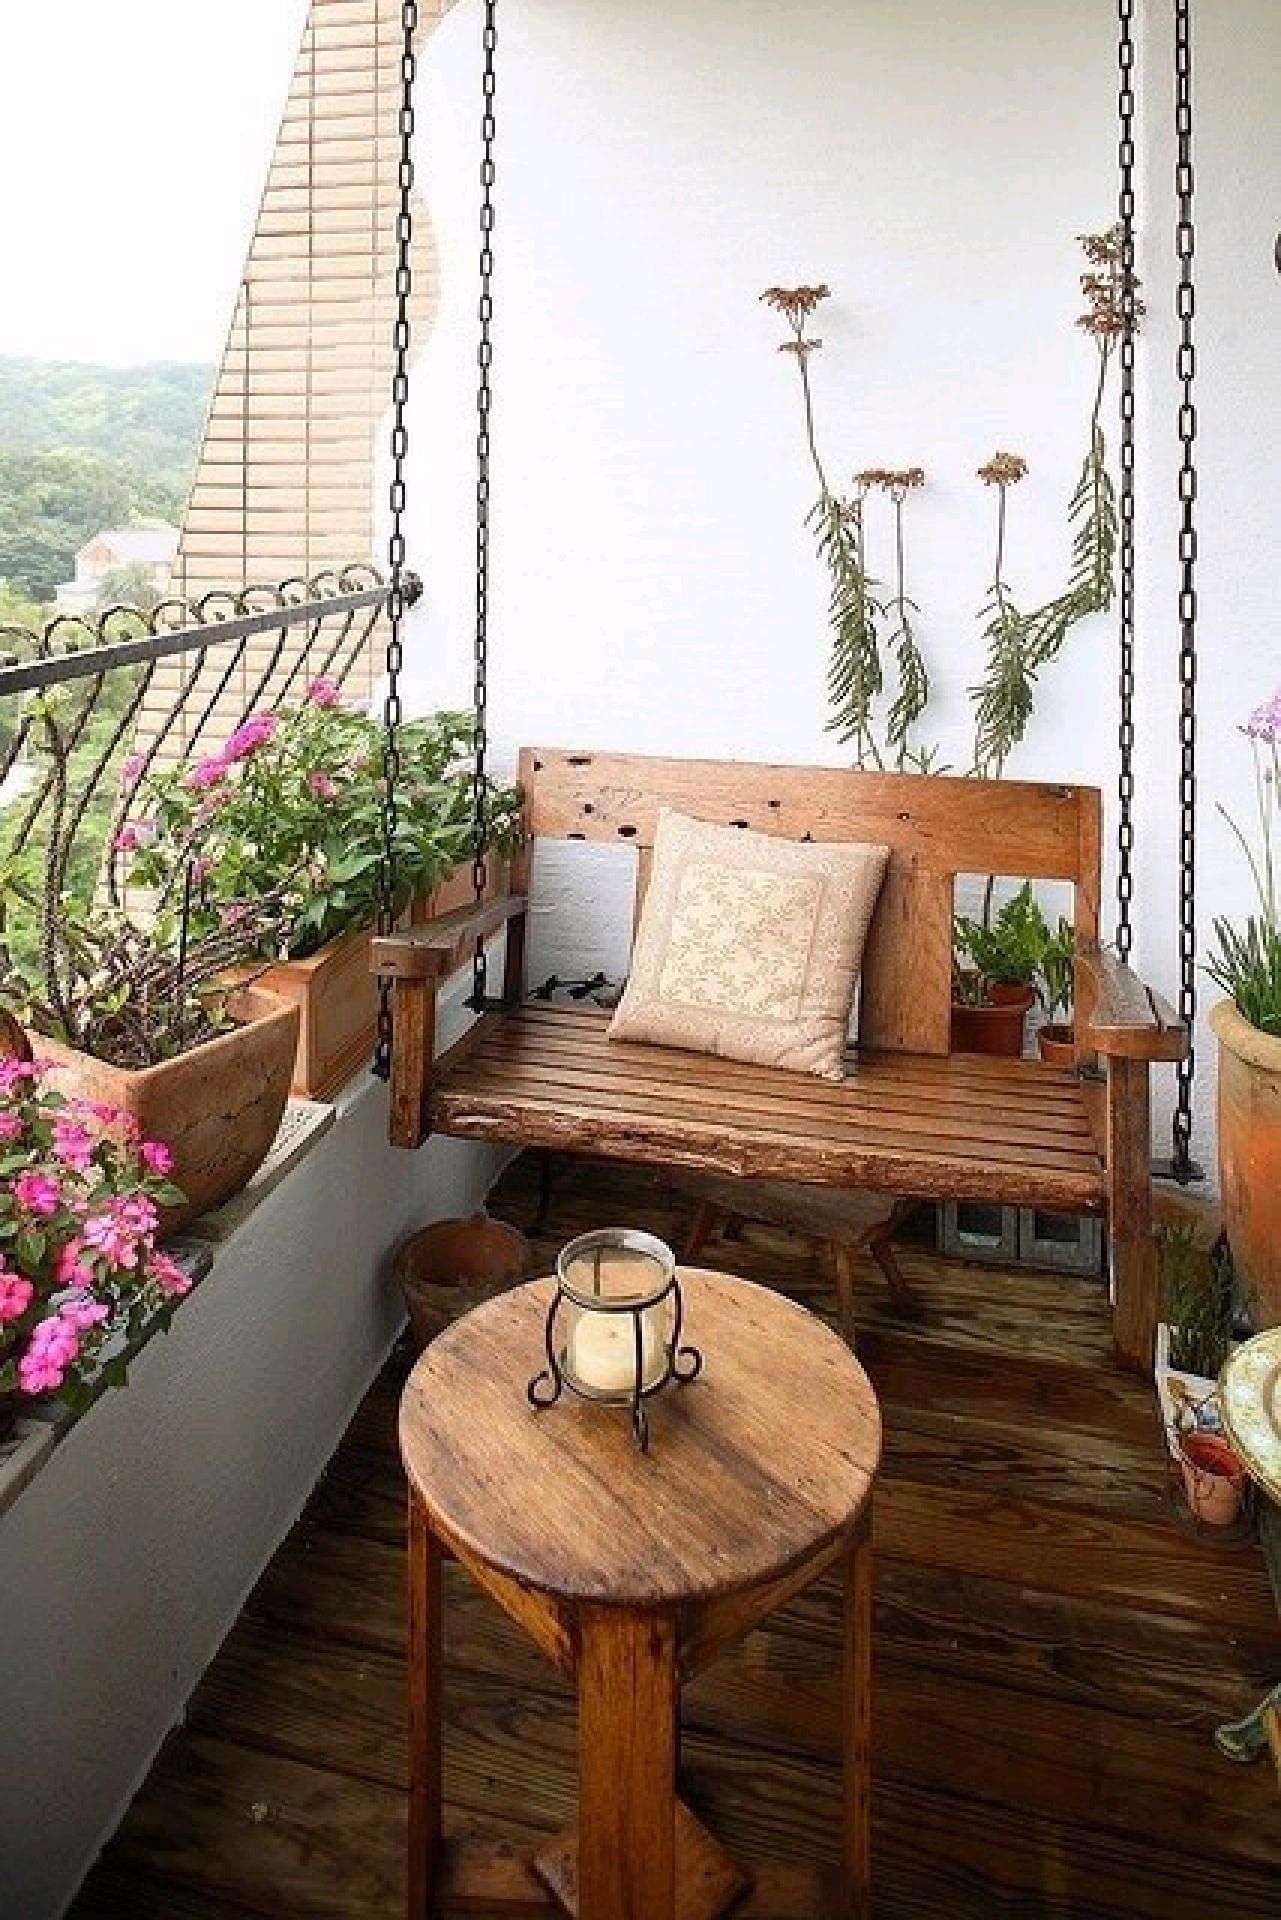 Furniture For A Small Balcony Or Terrace